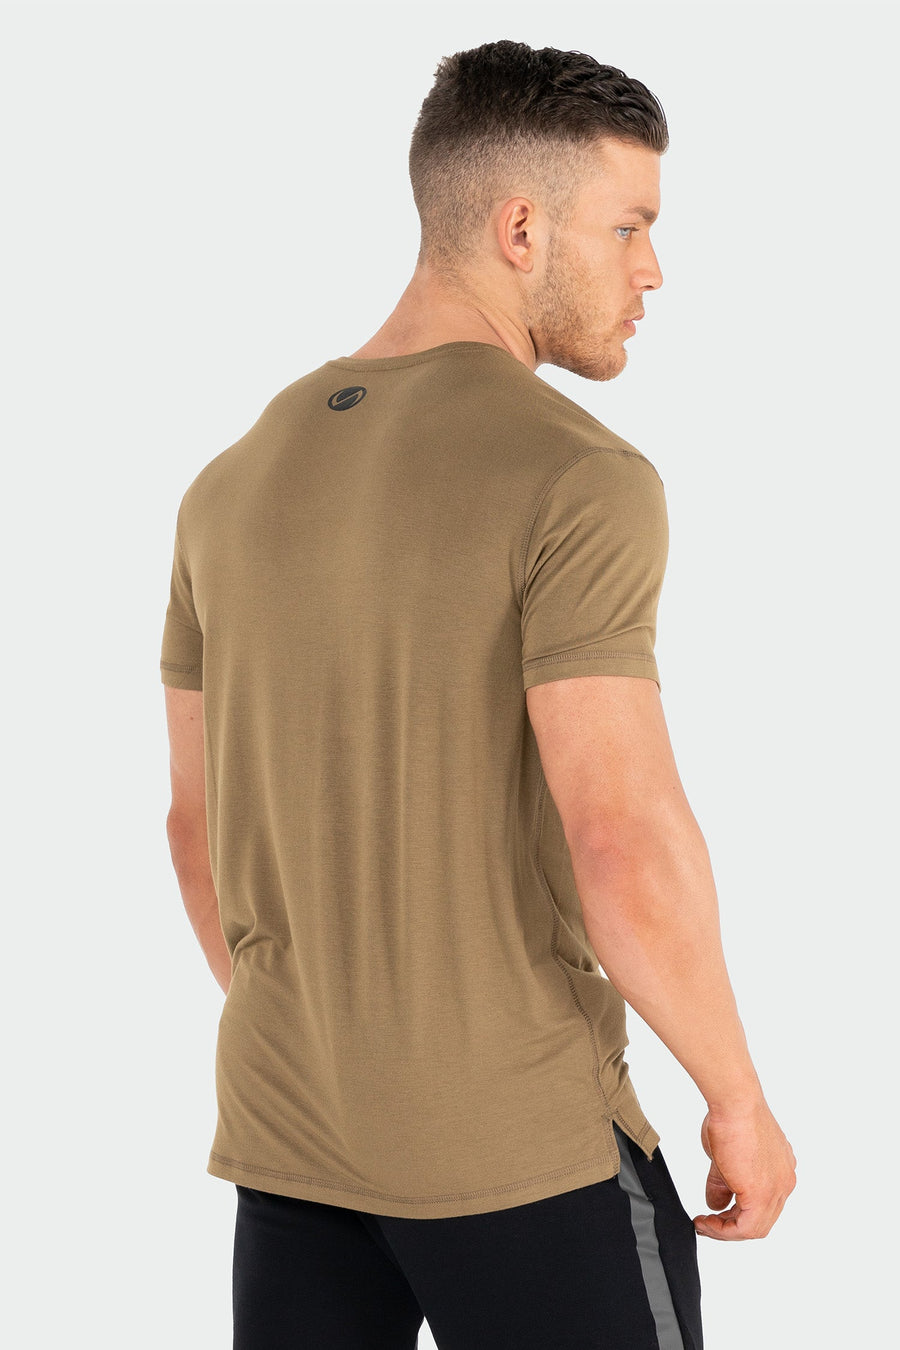 TLF Root Performance Bamboo Crew Neck - Men Short sleeves - Olive -  Green - 2